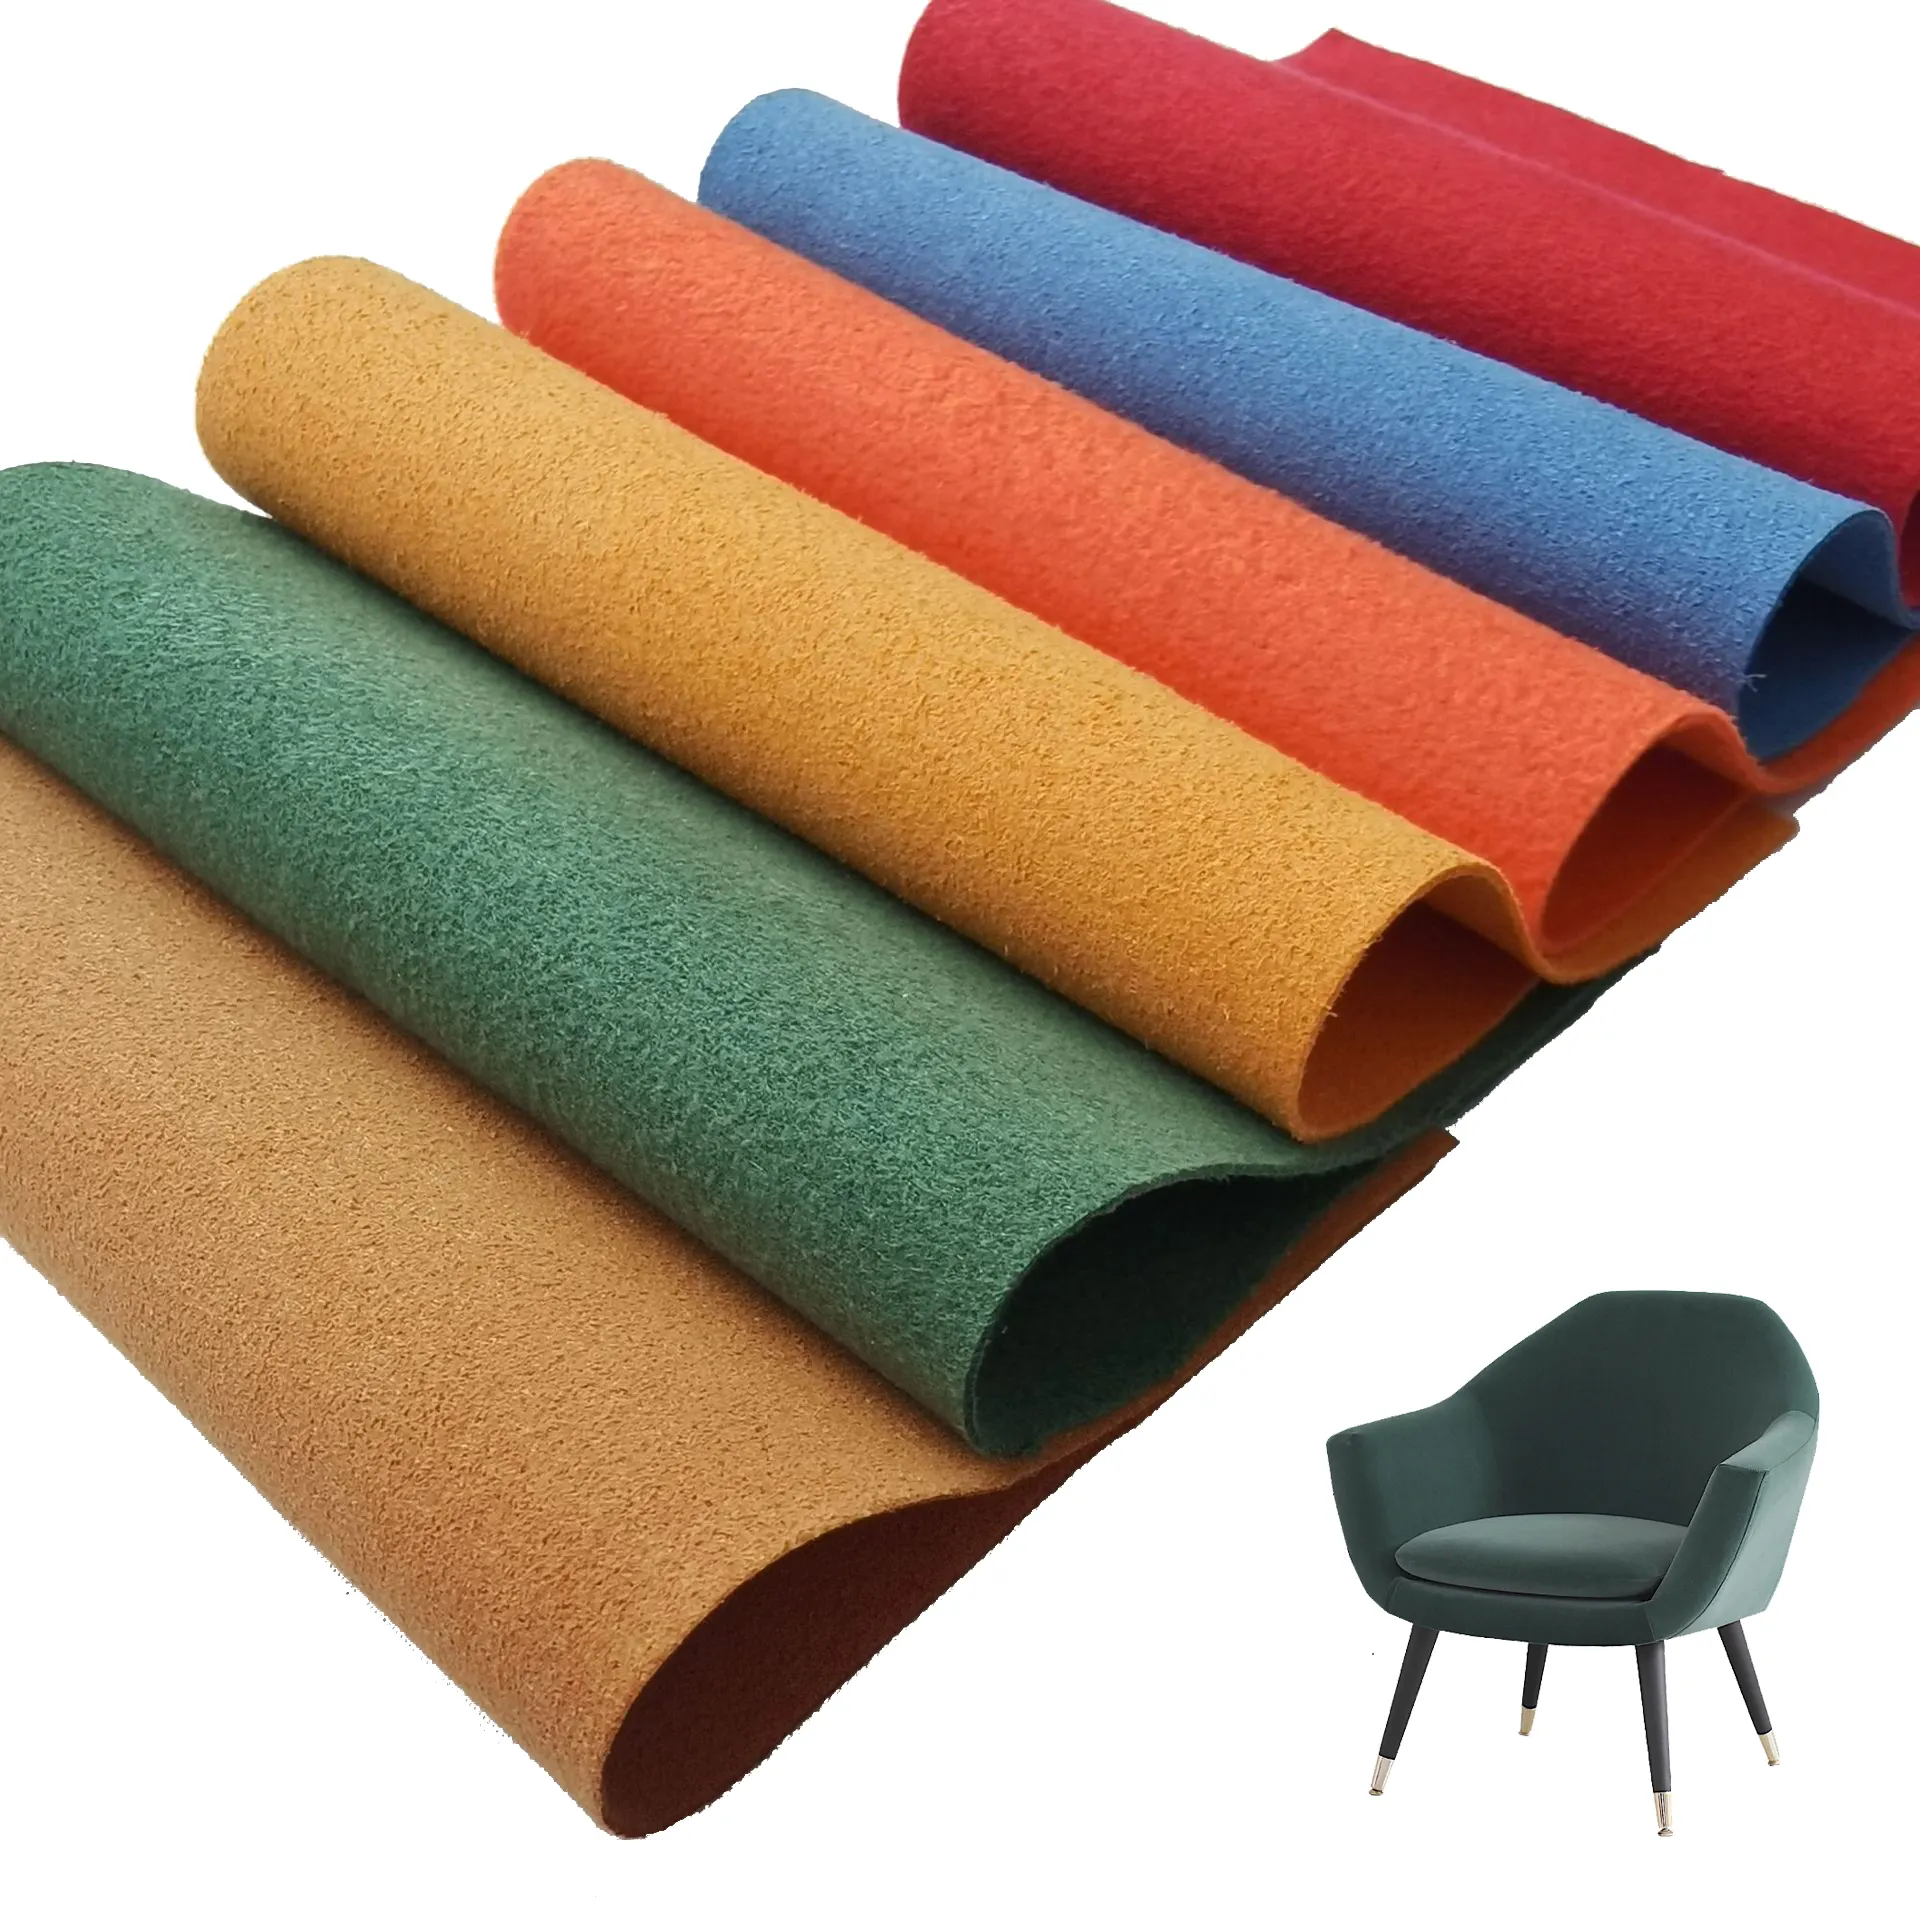 Fabric for Shoes Making Material Car Seat for Making Chair Sofa Faux Leather Double Face Suede Microfiber Green Color Woven